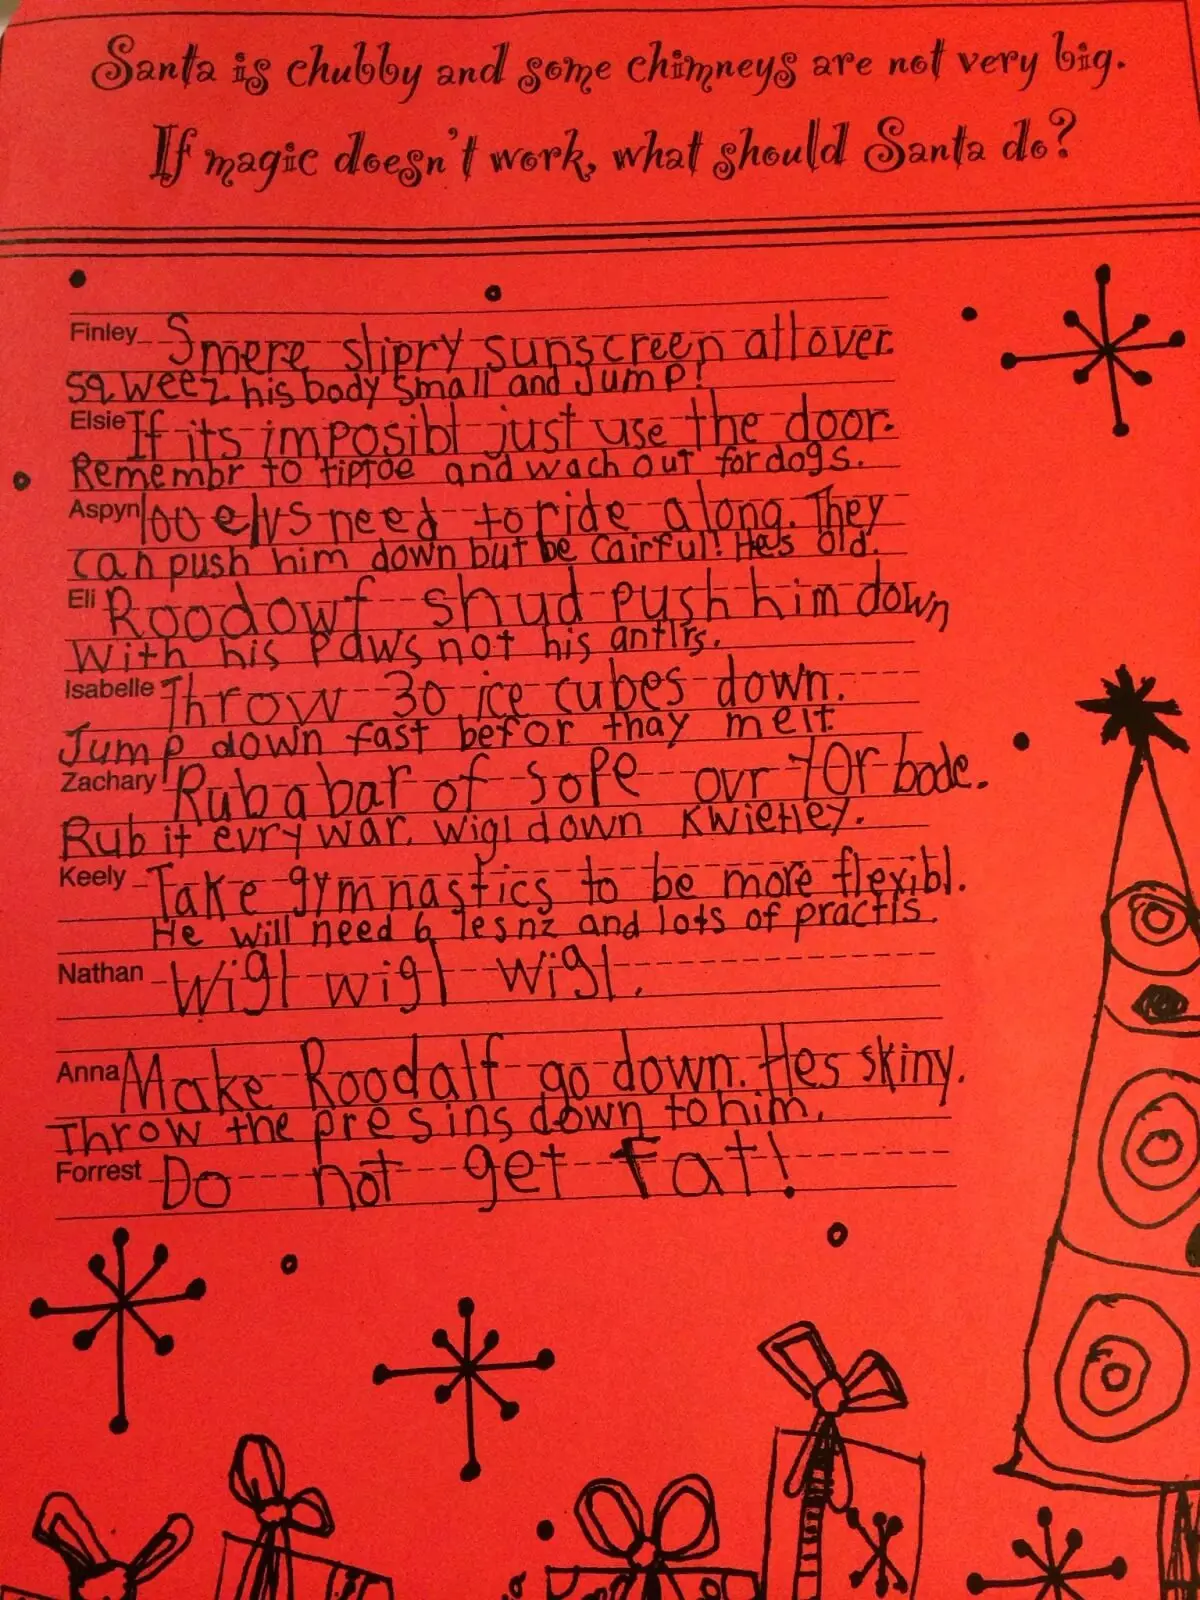 hilarious-advice-to-santa-from-1st-graders-1